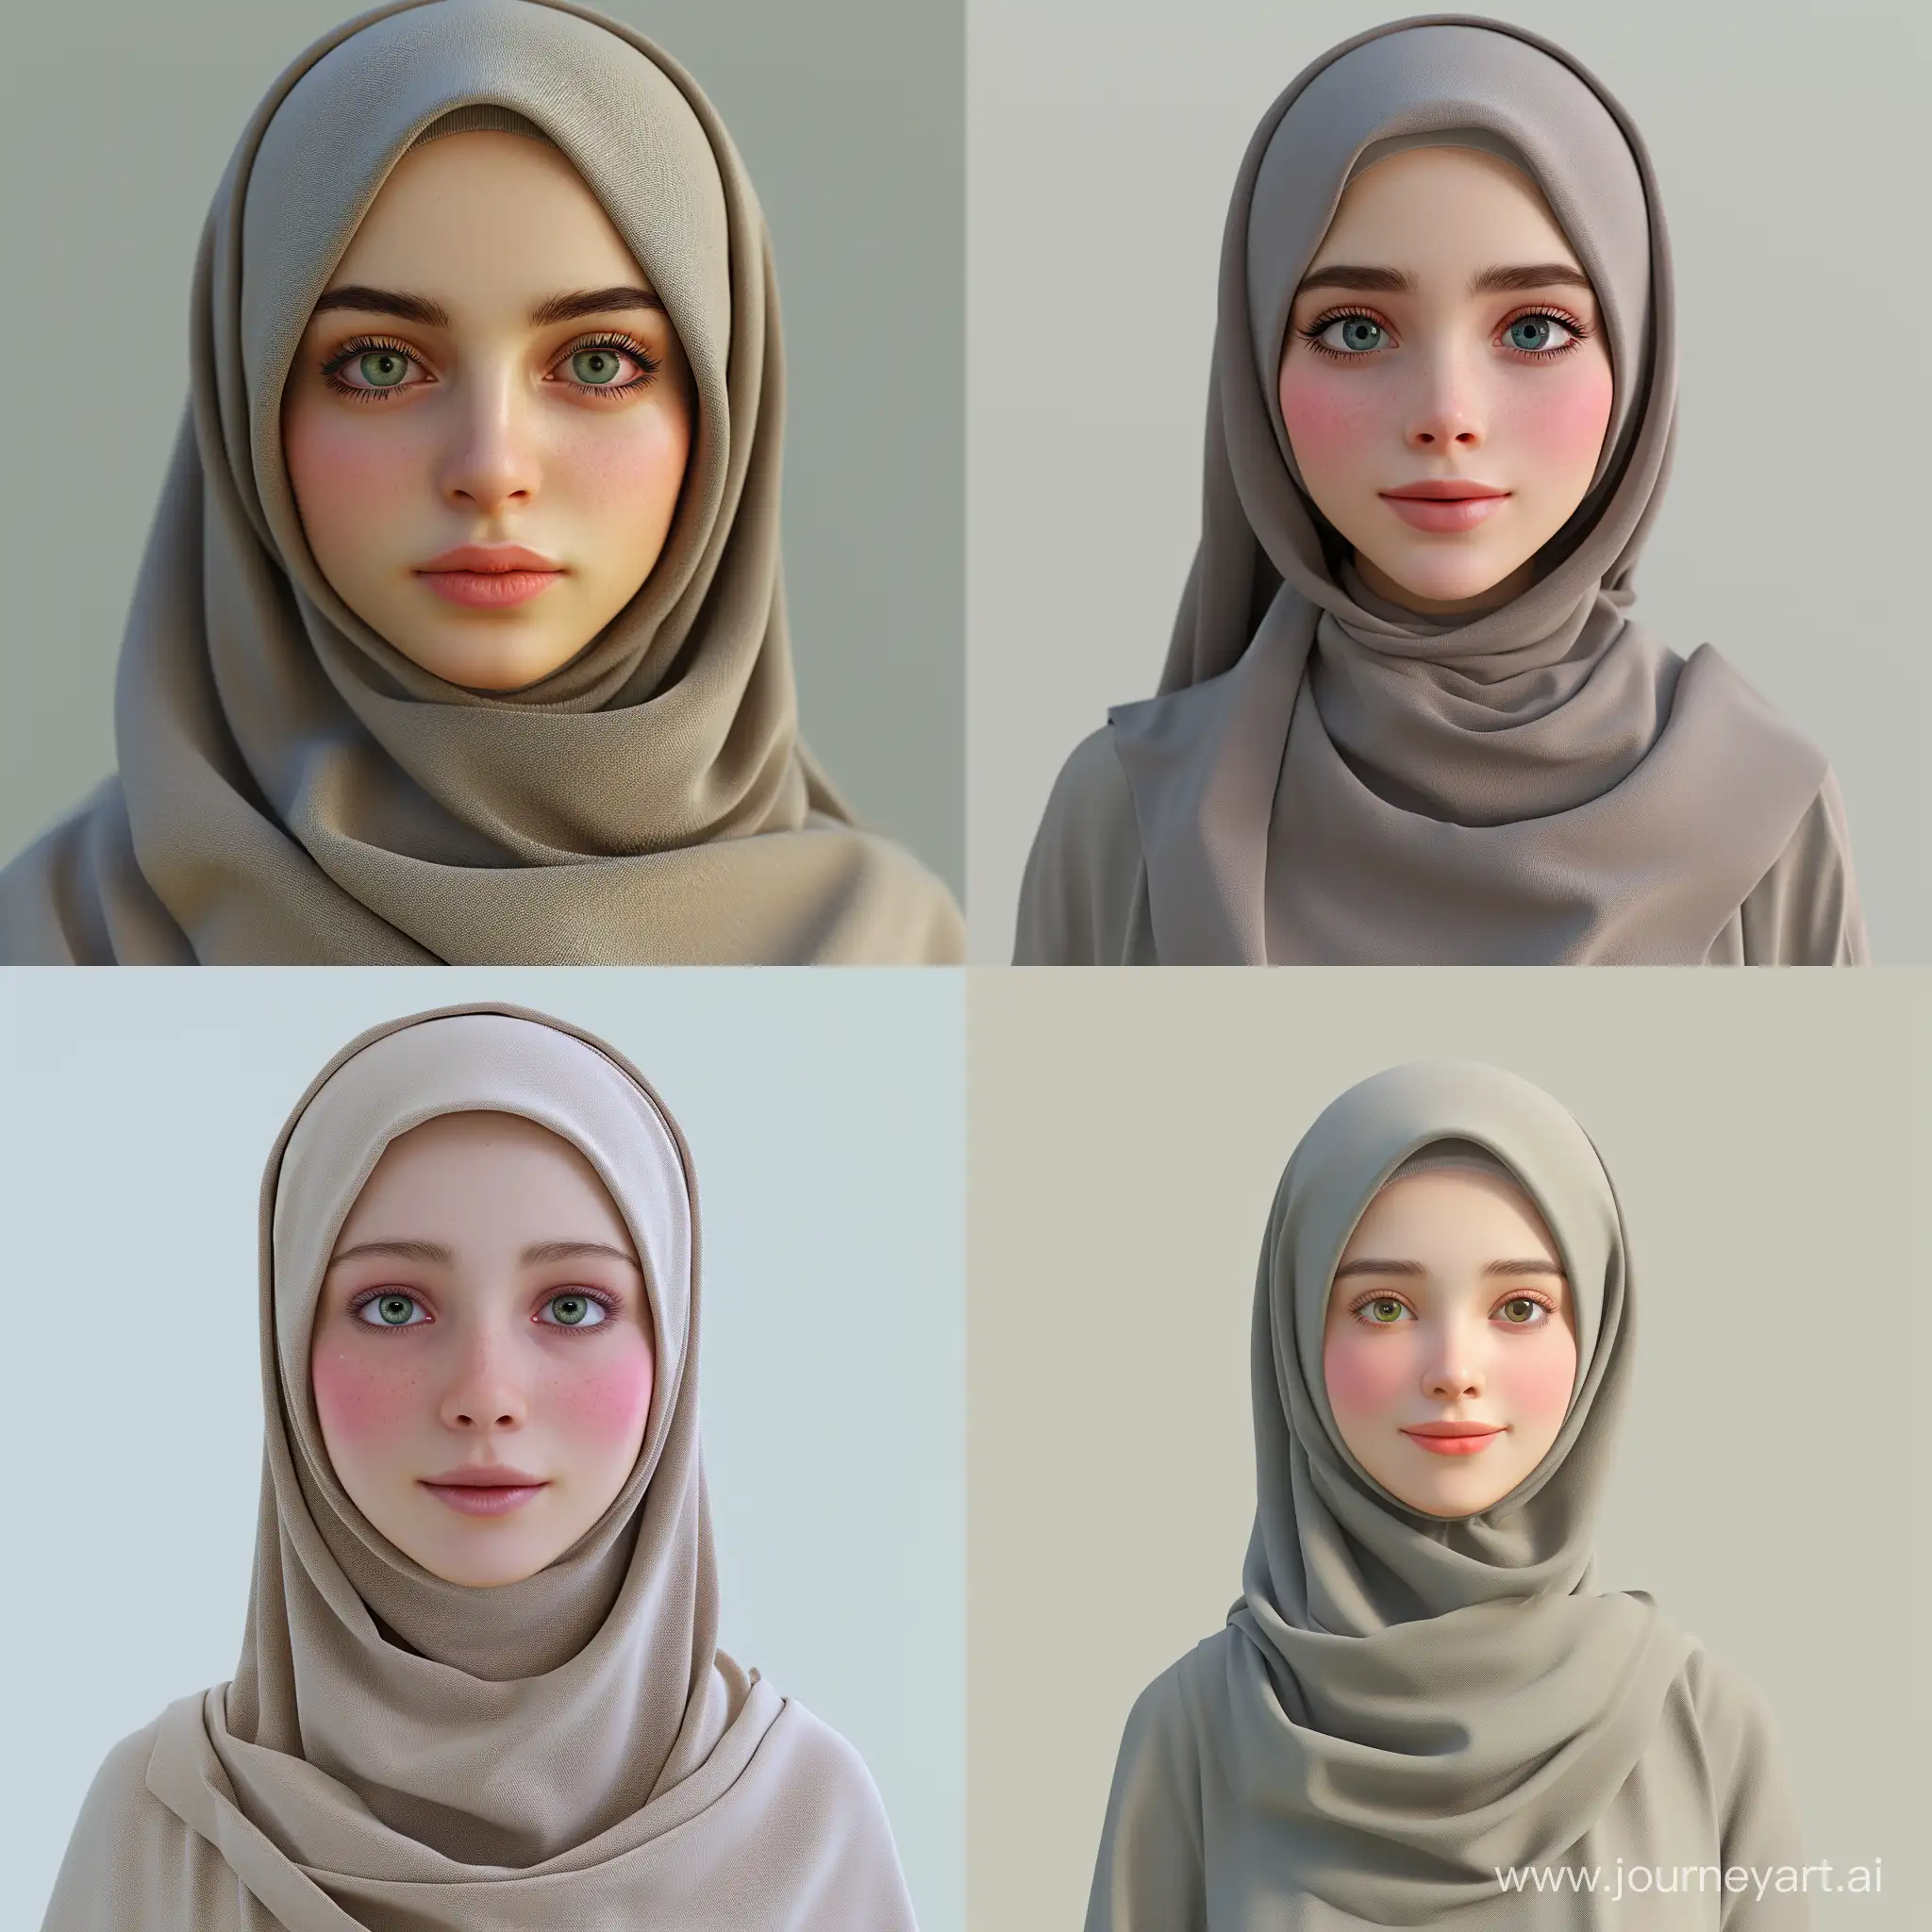 Young-Math-Teacher-with-Olive-Green-Eyes-and-Hijab-in-Stunning-3D-Render